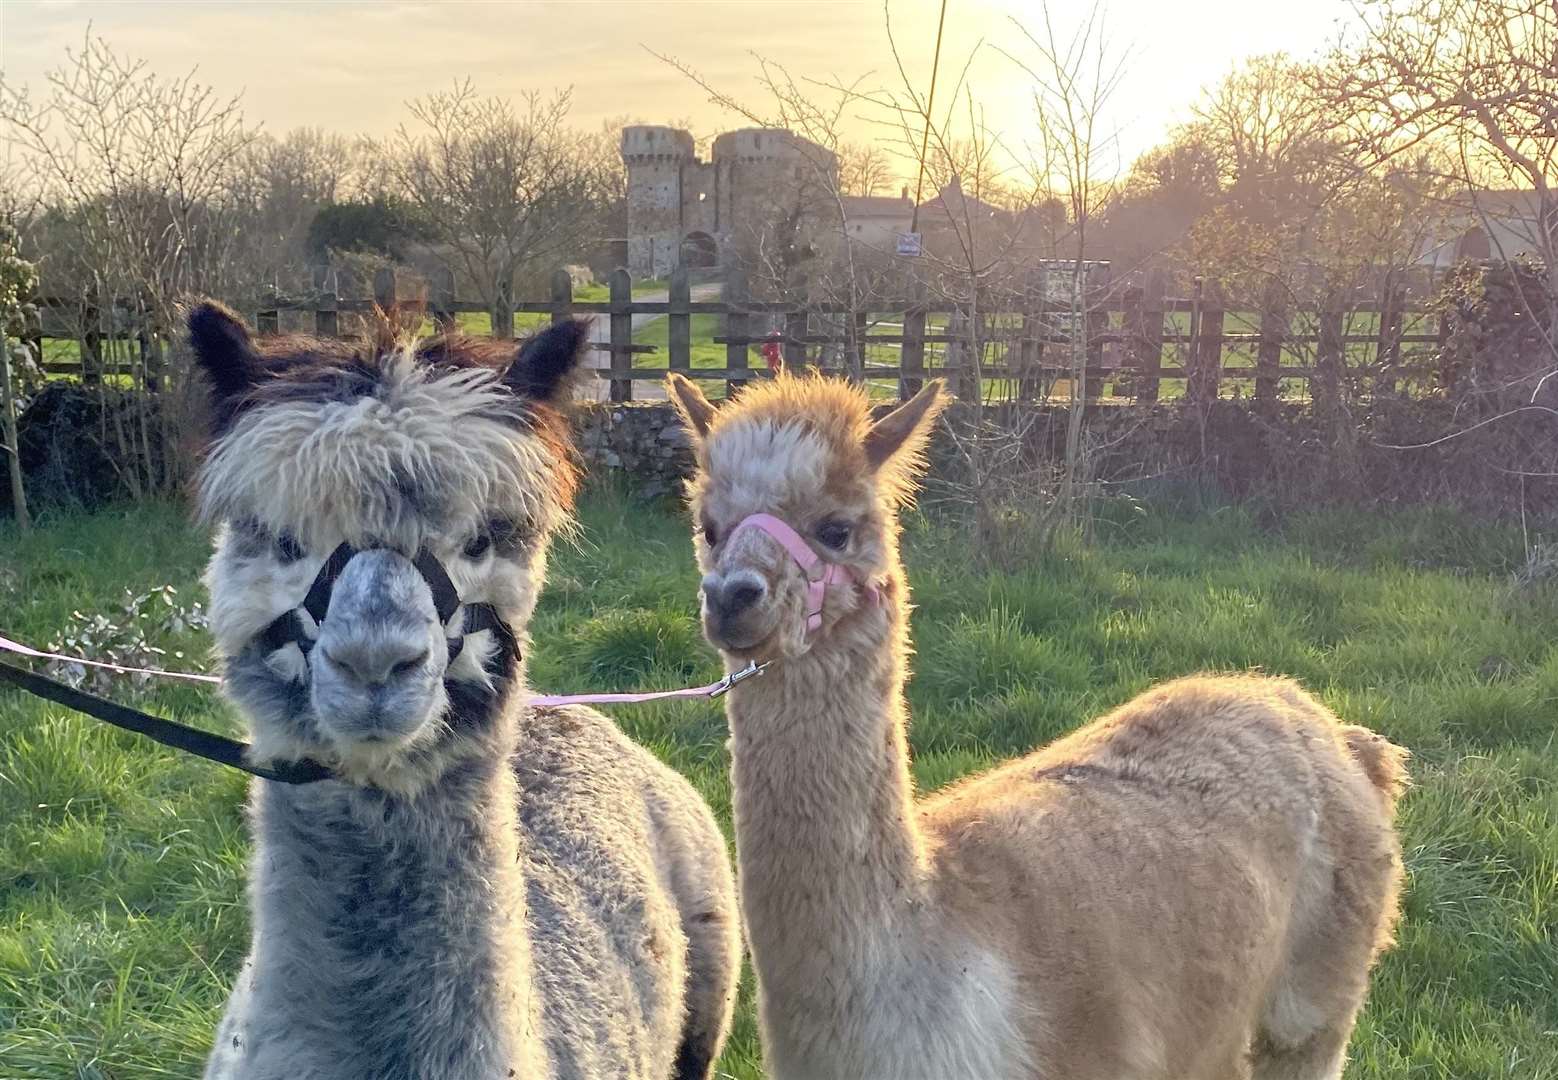 Sophie says alpacas are incredible animals